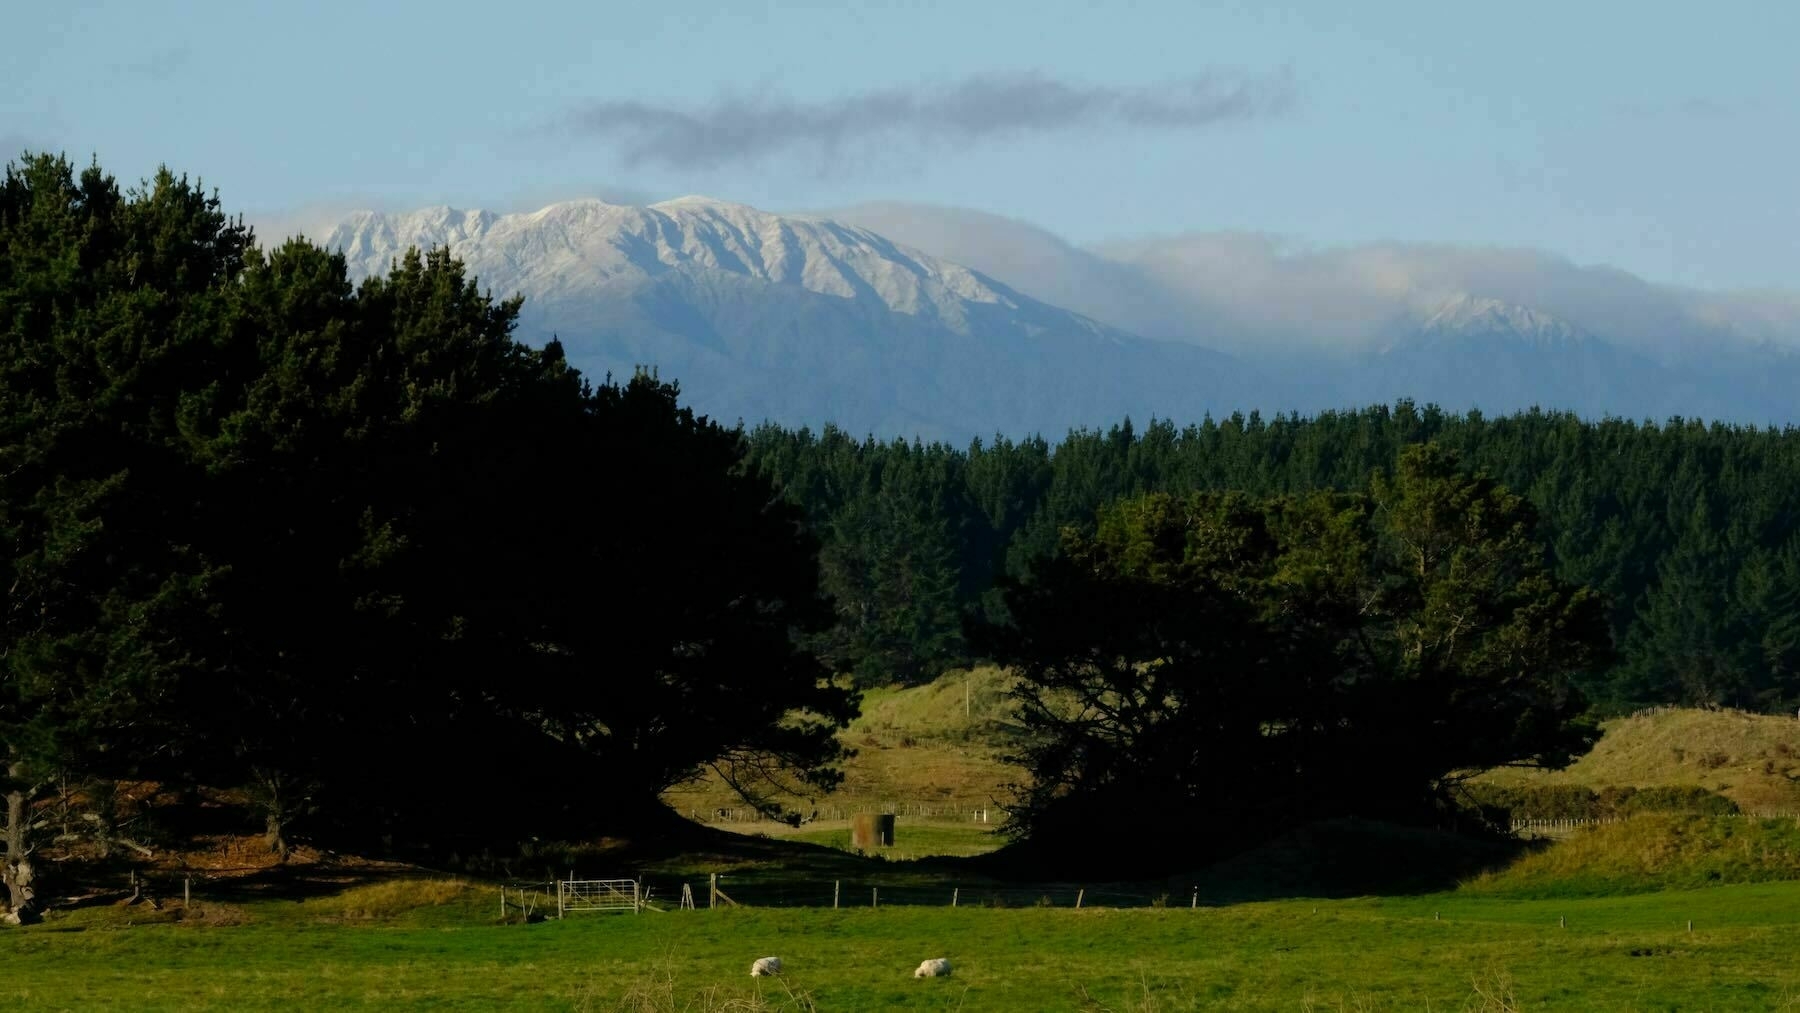 Lightly snow topped mountain seen across a green paddock with two sheep. 